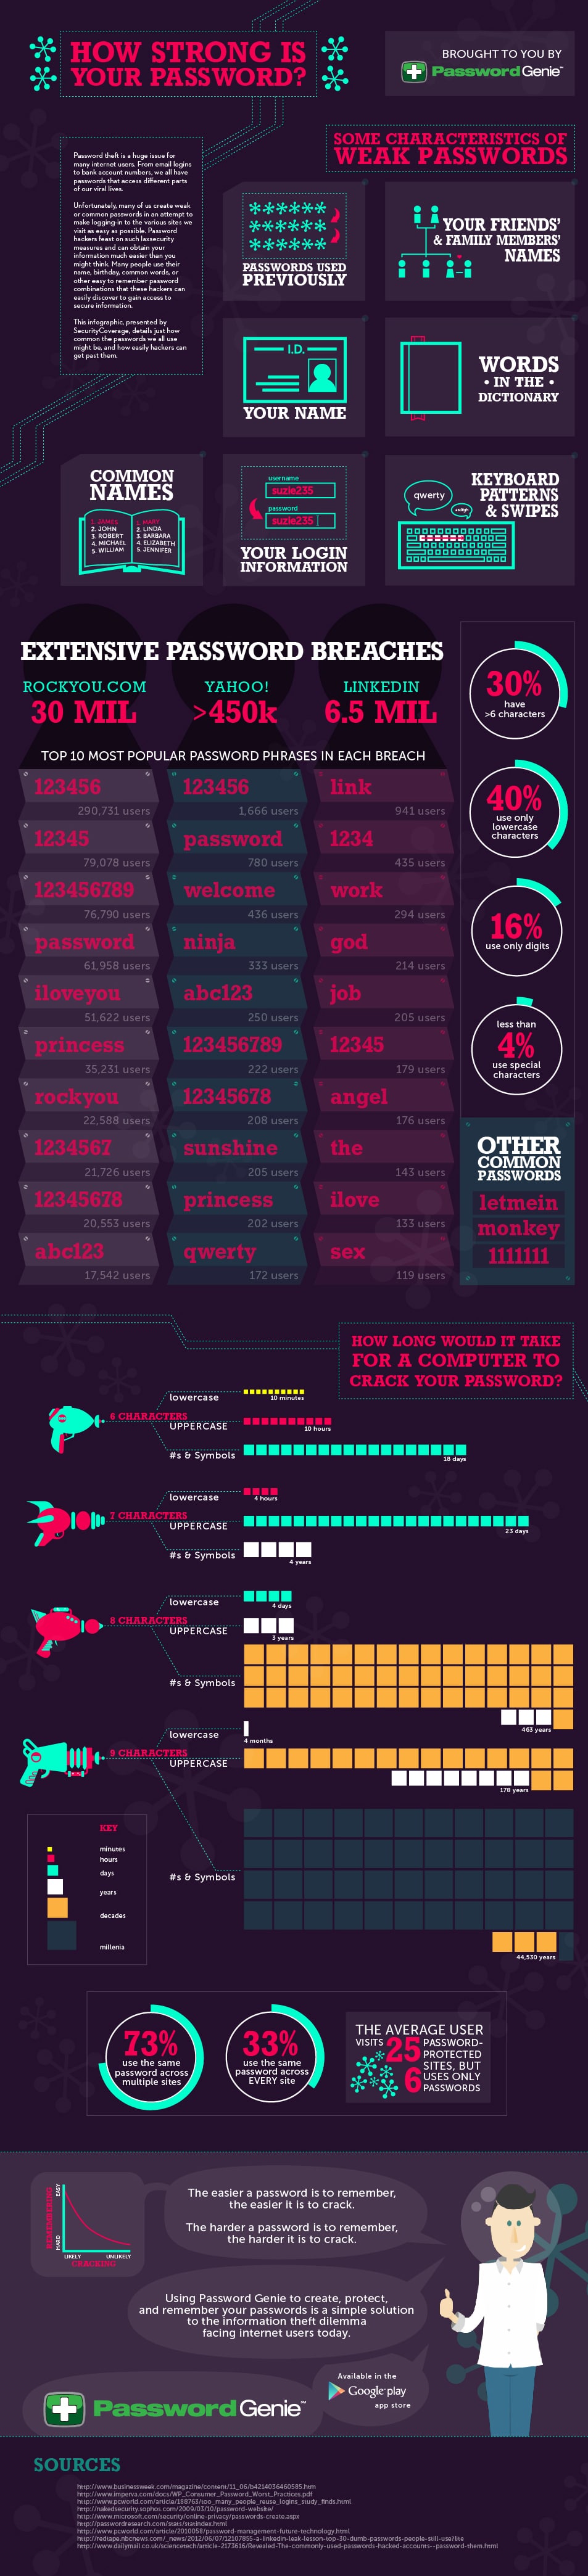 Password Strength How Strong Is Your Password Infographic